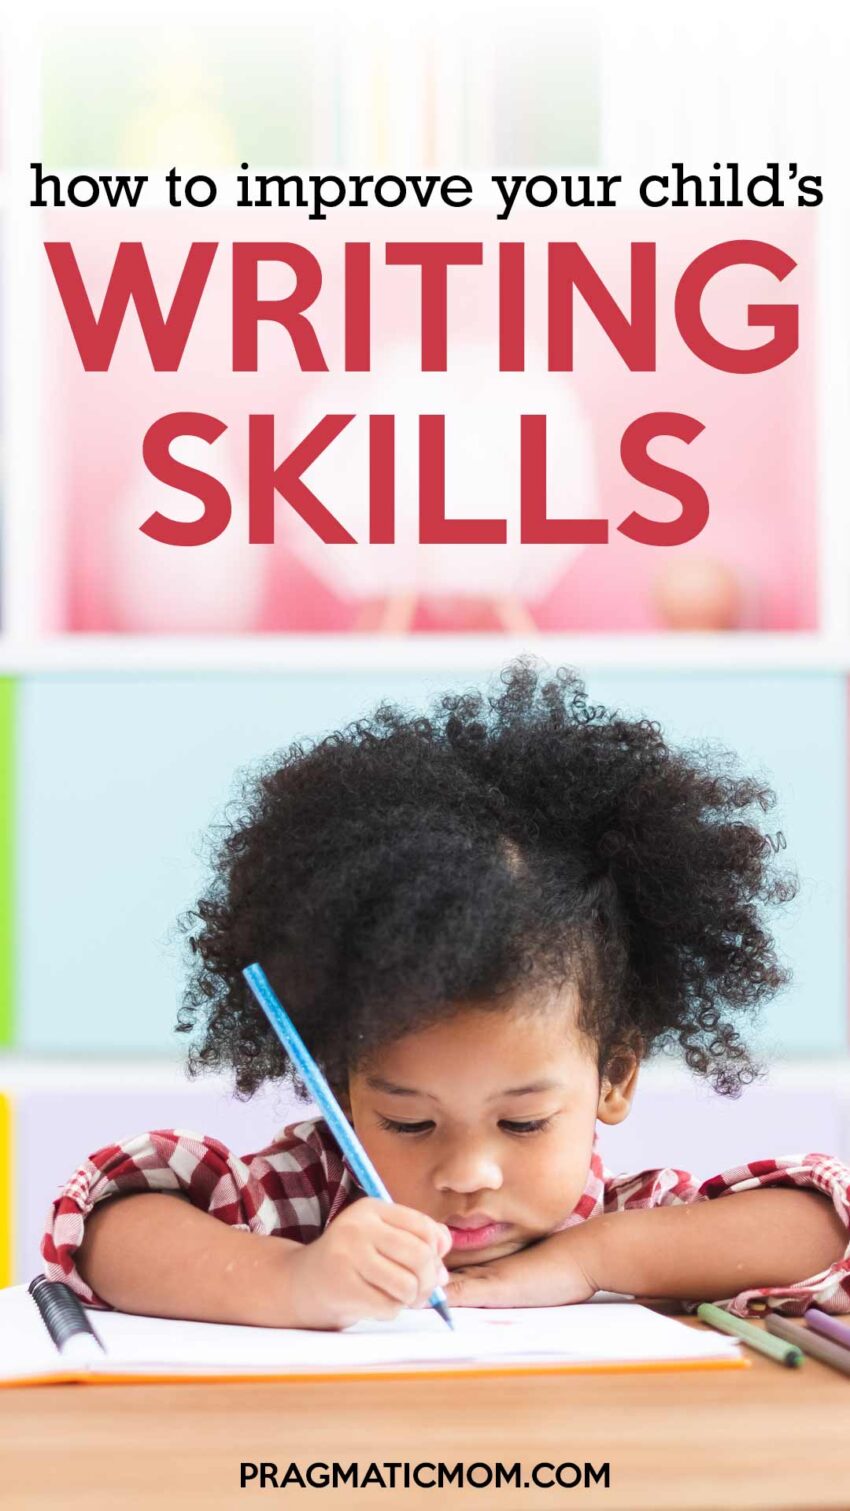 how to Improve Your Child's Writing Skills